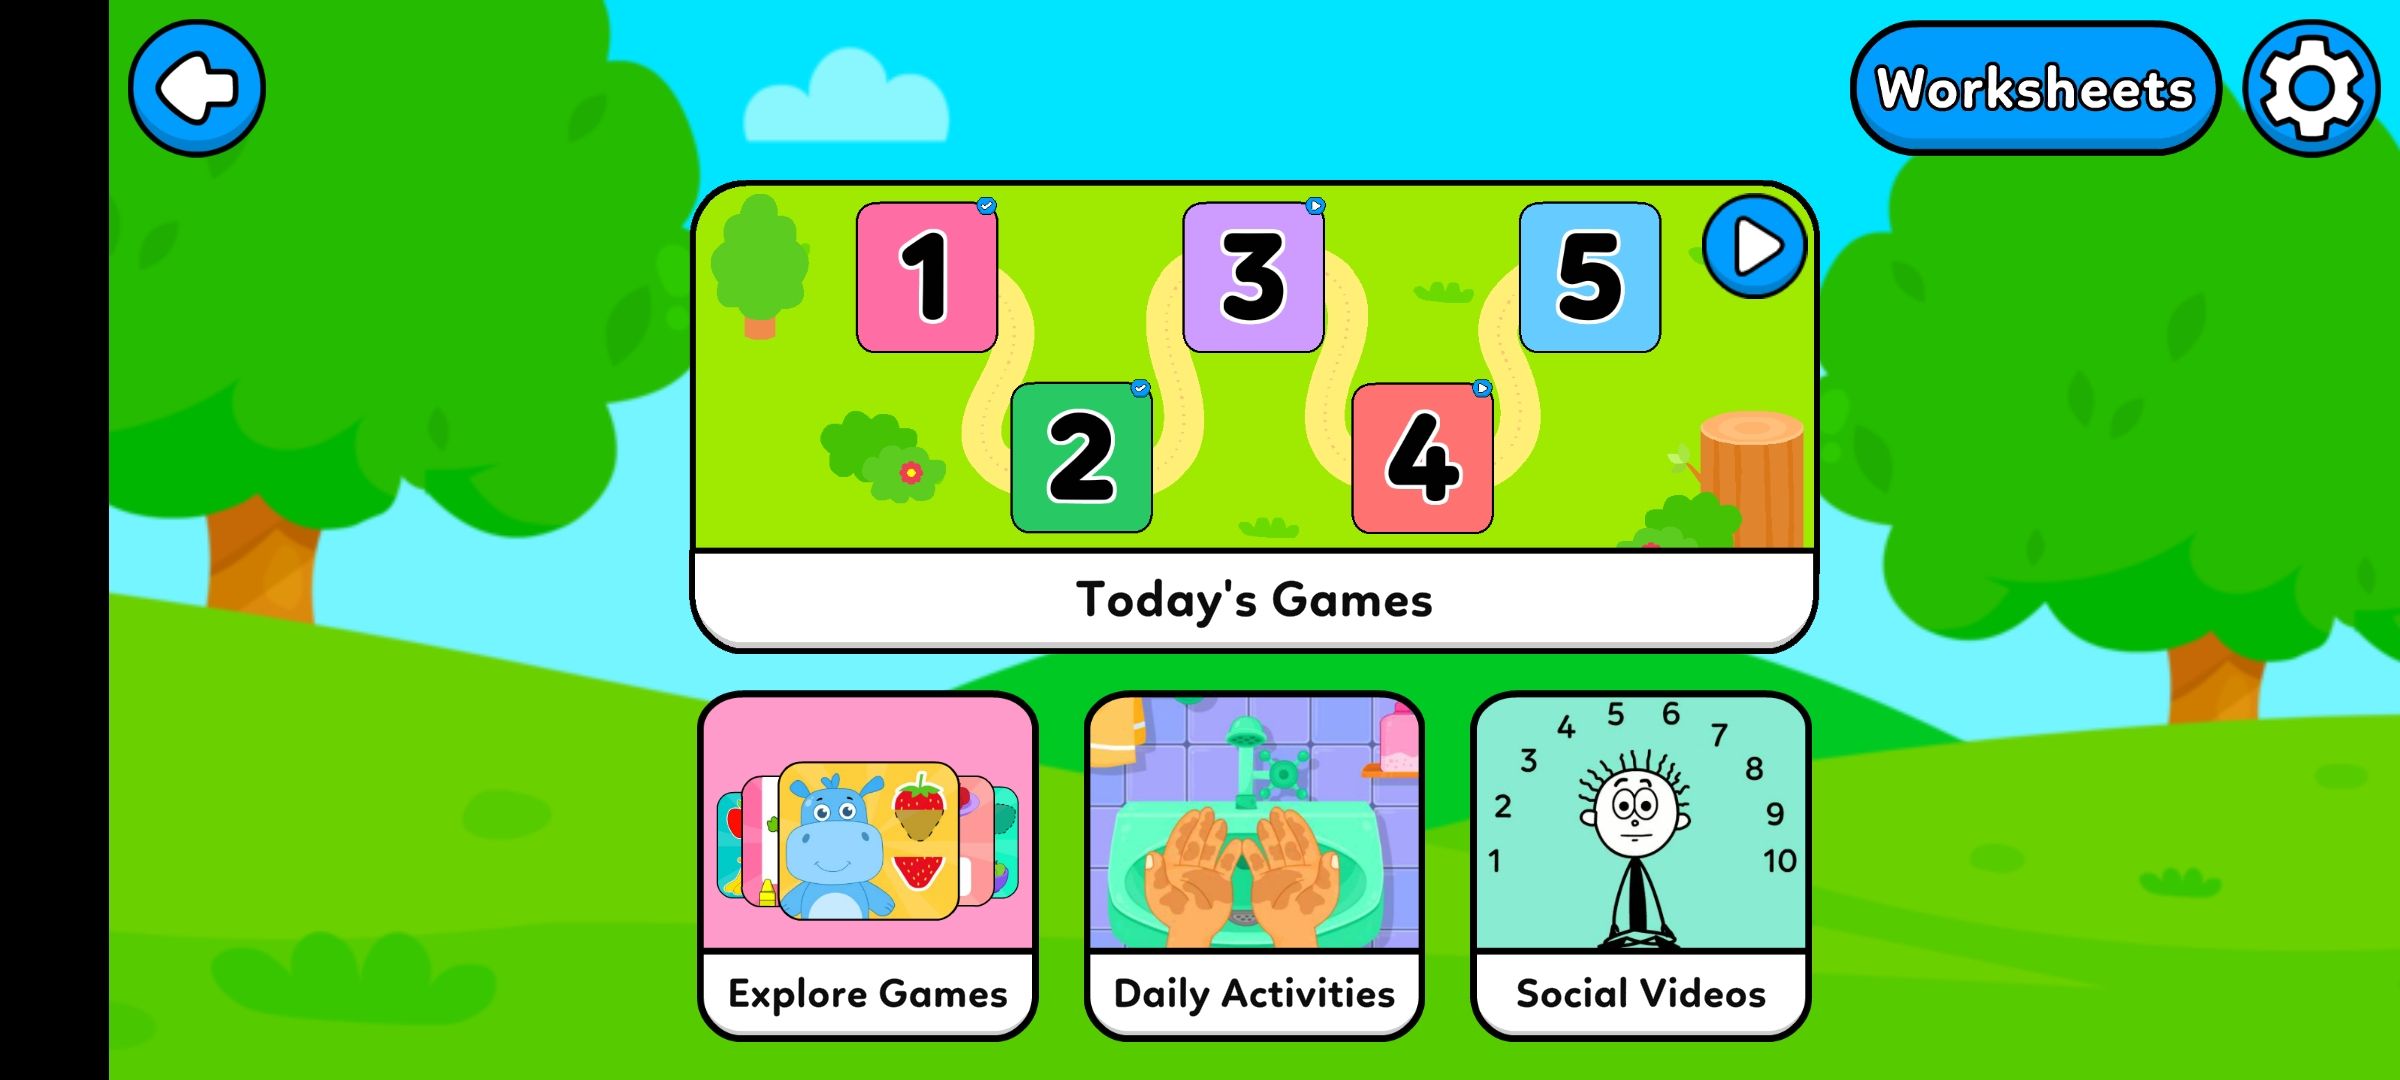 AutiSpark Home Screen with activities for games and worksheets